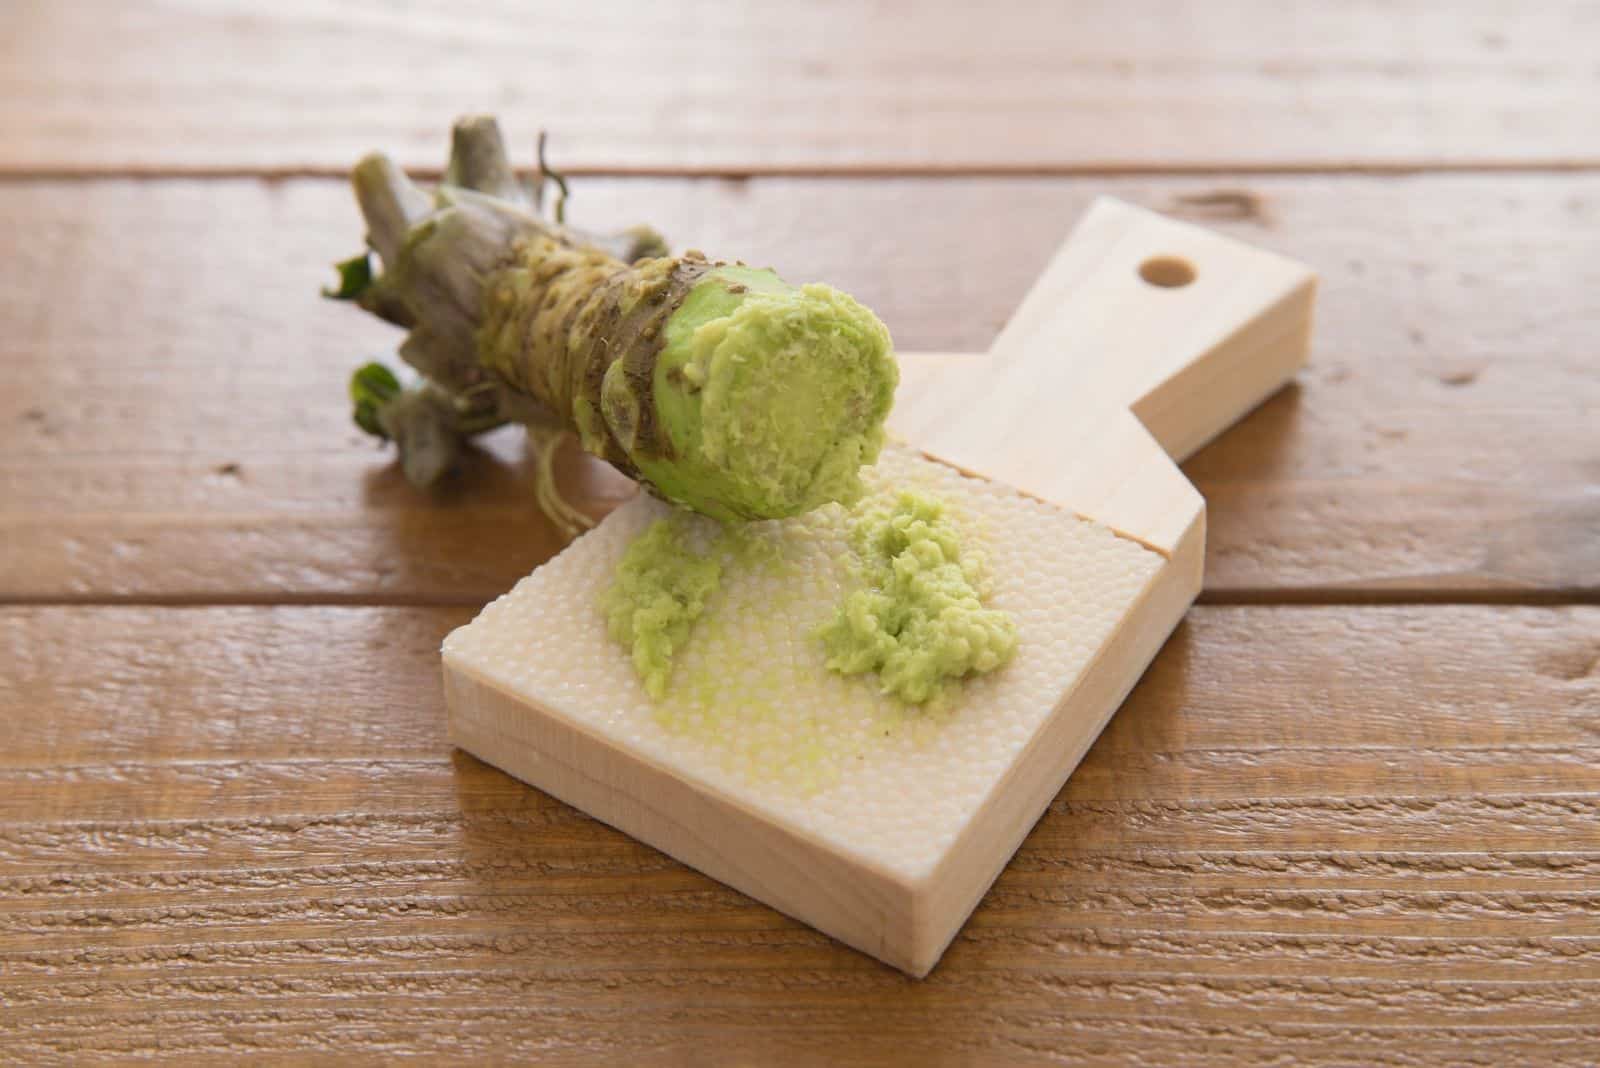 japanese spice wasabi grated on the board